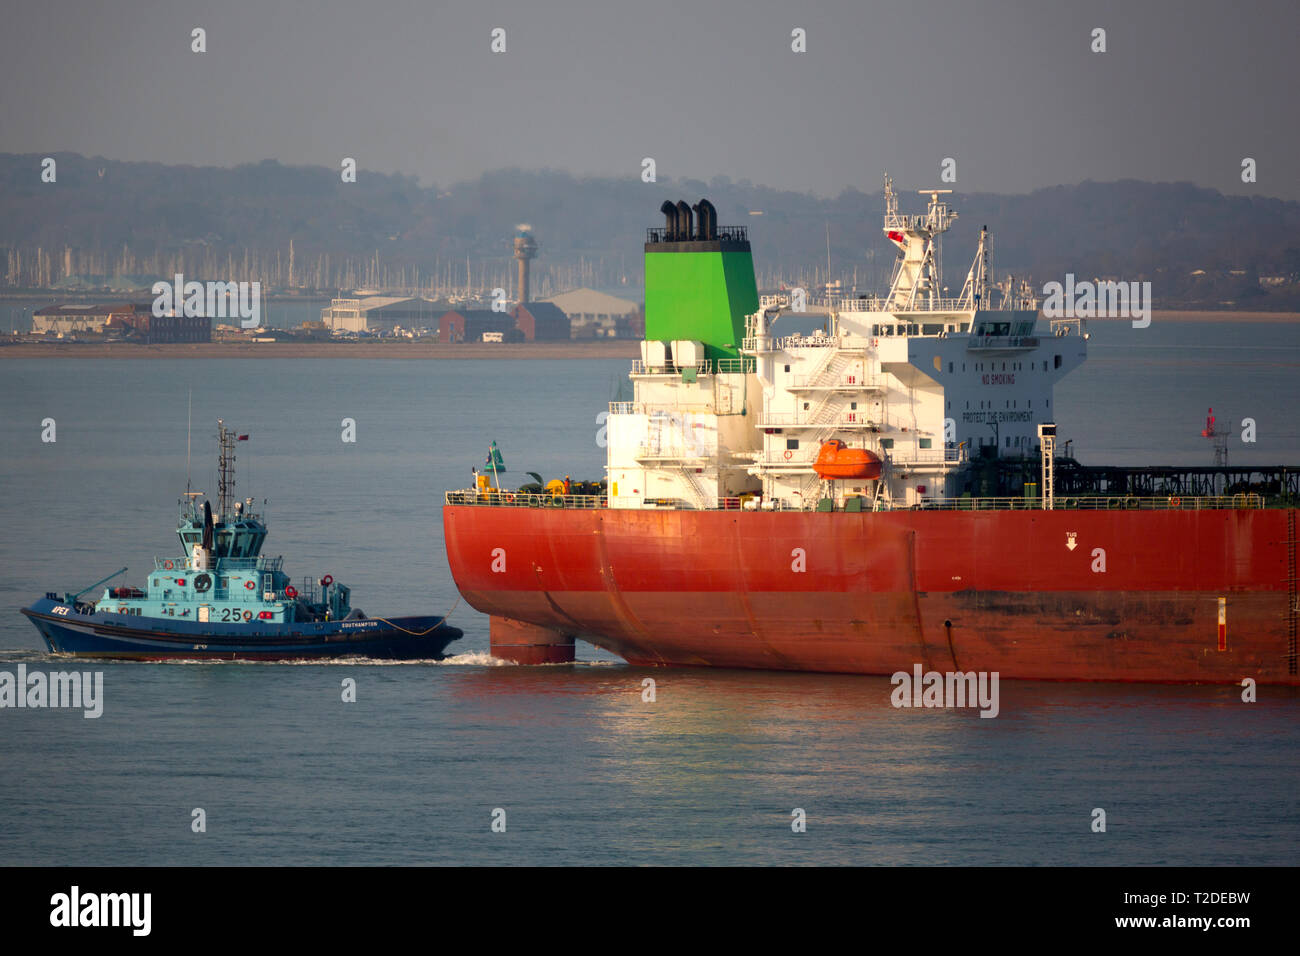 tow,assist,Oil,Tanker,Pacific,Jewels,Voith tractor tug,services,ABP,Southampton,Water,port,Fawley,Oil,Refinery,The Solent,Cowes,Isle of Wight,UK, Stock Photo